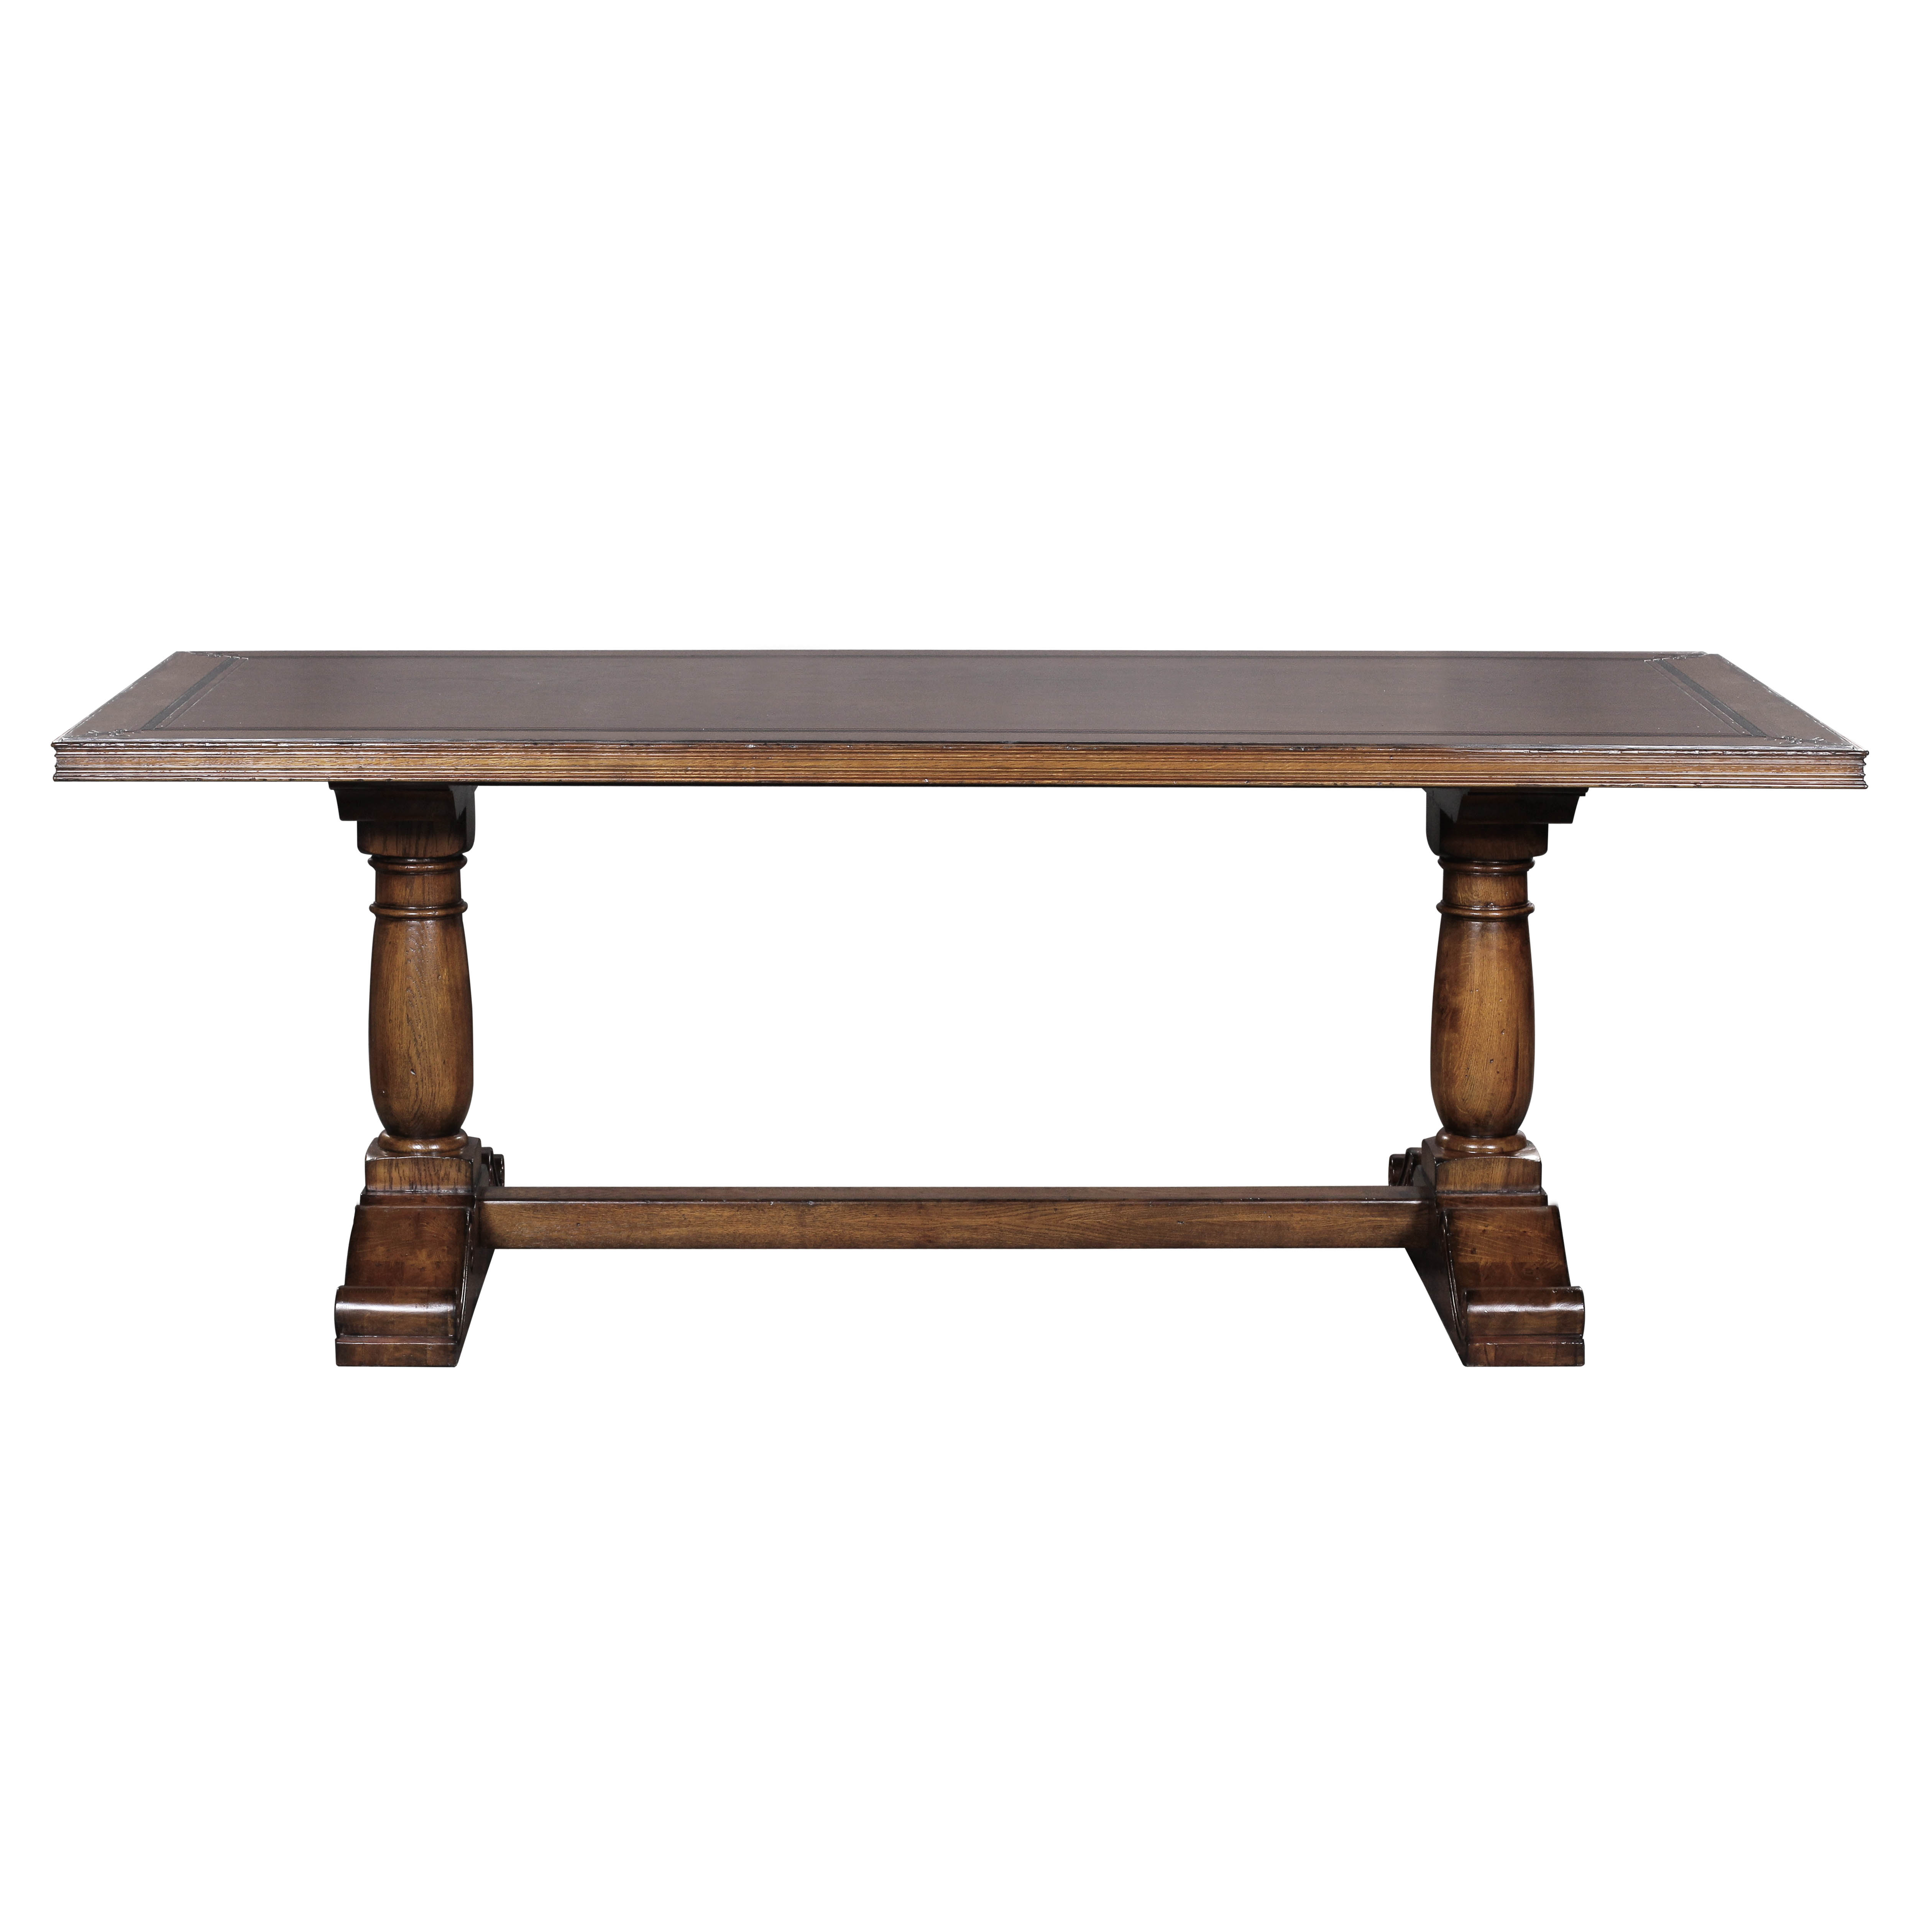 34453Oak - French Dining Table Oak, Small, OMD, New2017 - 1